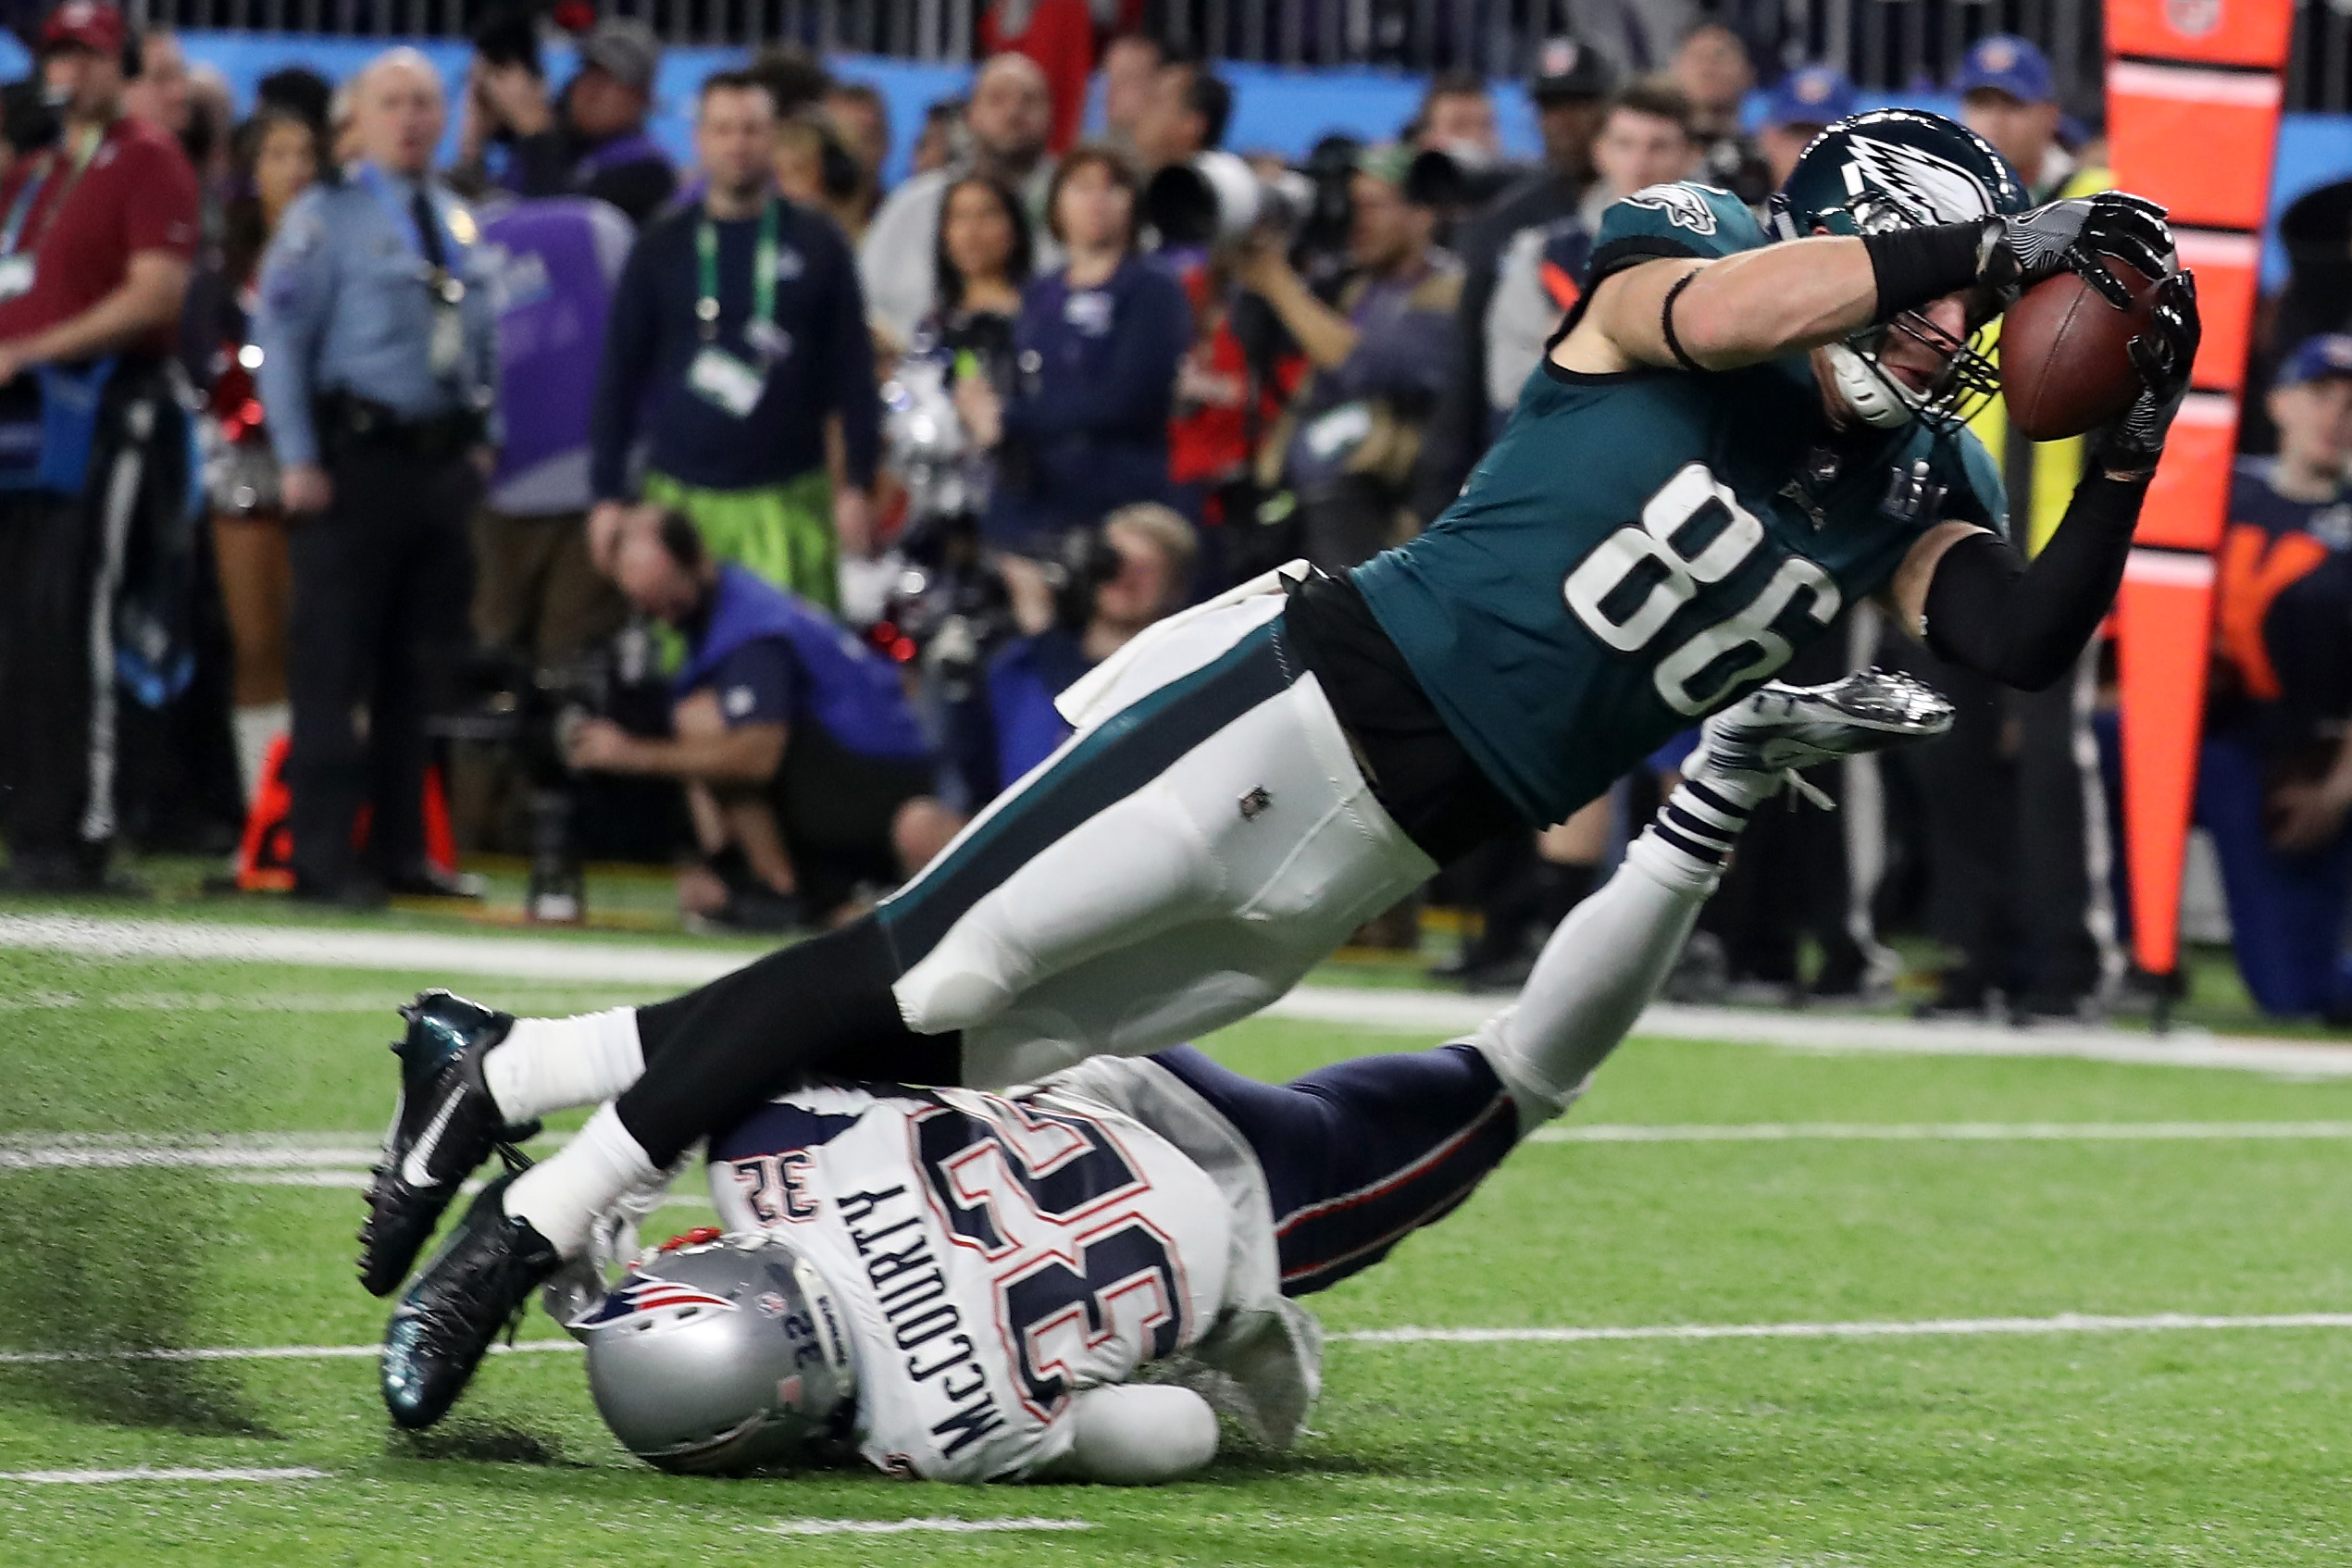 Eagles tight end says he thought Super Bowl winning play was 'an easy  touchdown' - ABC News